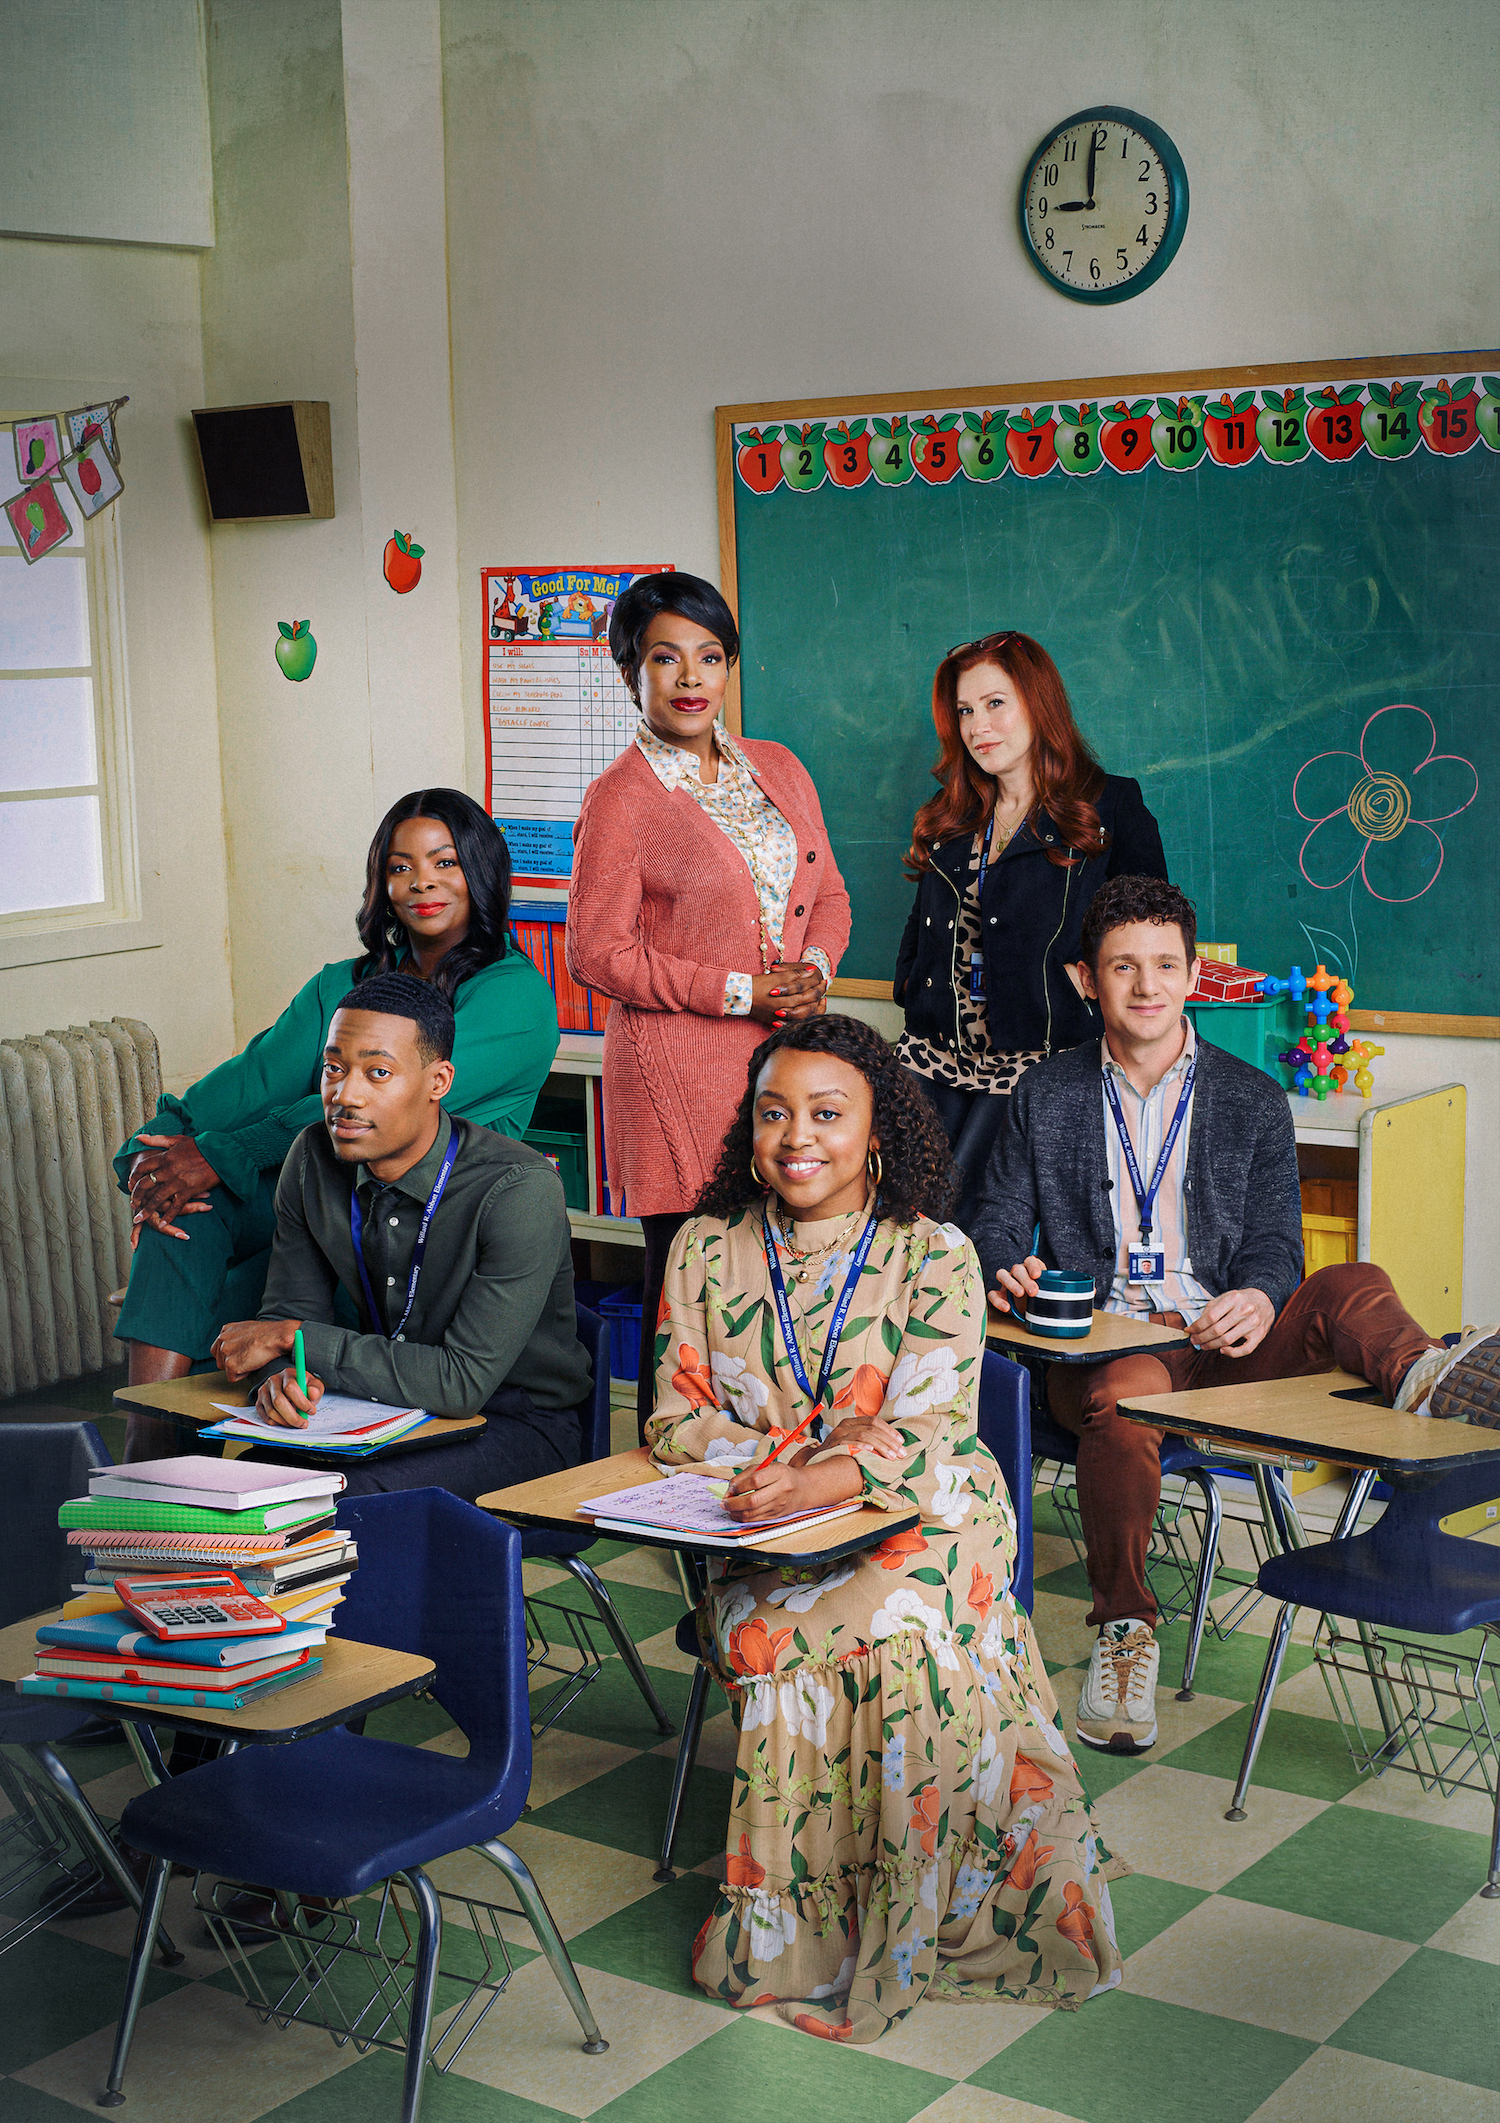 The cast of Abbott Elementary - Tyler James Williams as Gregory, Janelle James as Ava, Quinta Brunson as Janine, Sheryl Lee Ralph as Barbara, Chris Perfetti as Jacob, and Lisa Ann Walter as Melissa